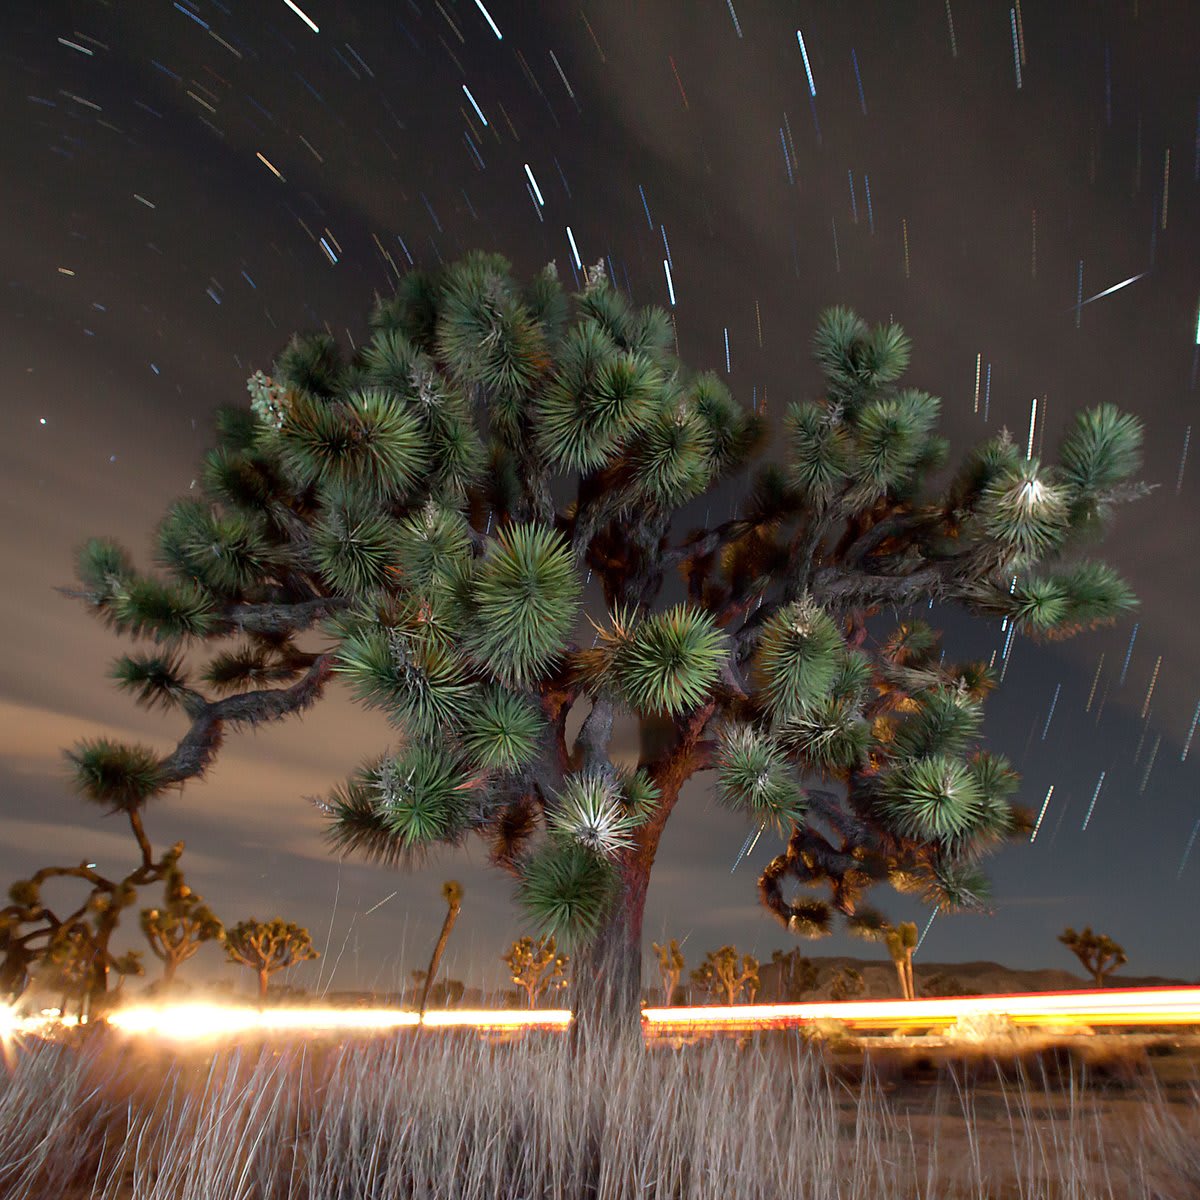 Historic Vote Gives California Joshua Trees Protection as Temporary Endangered Species.